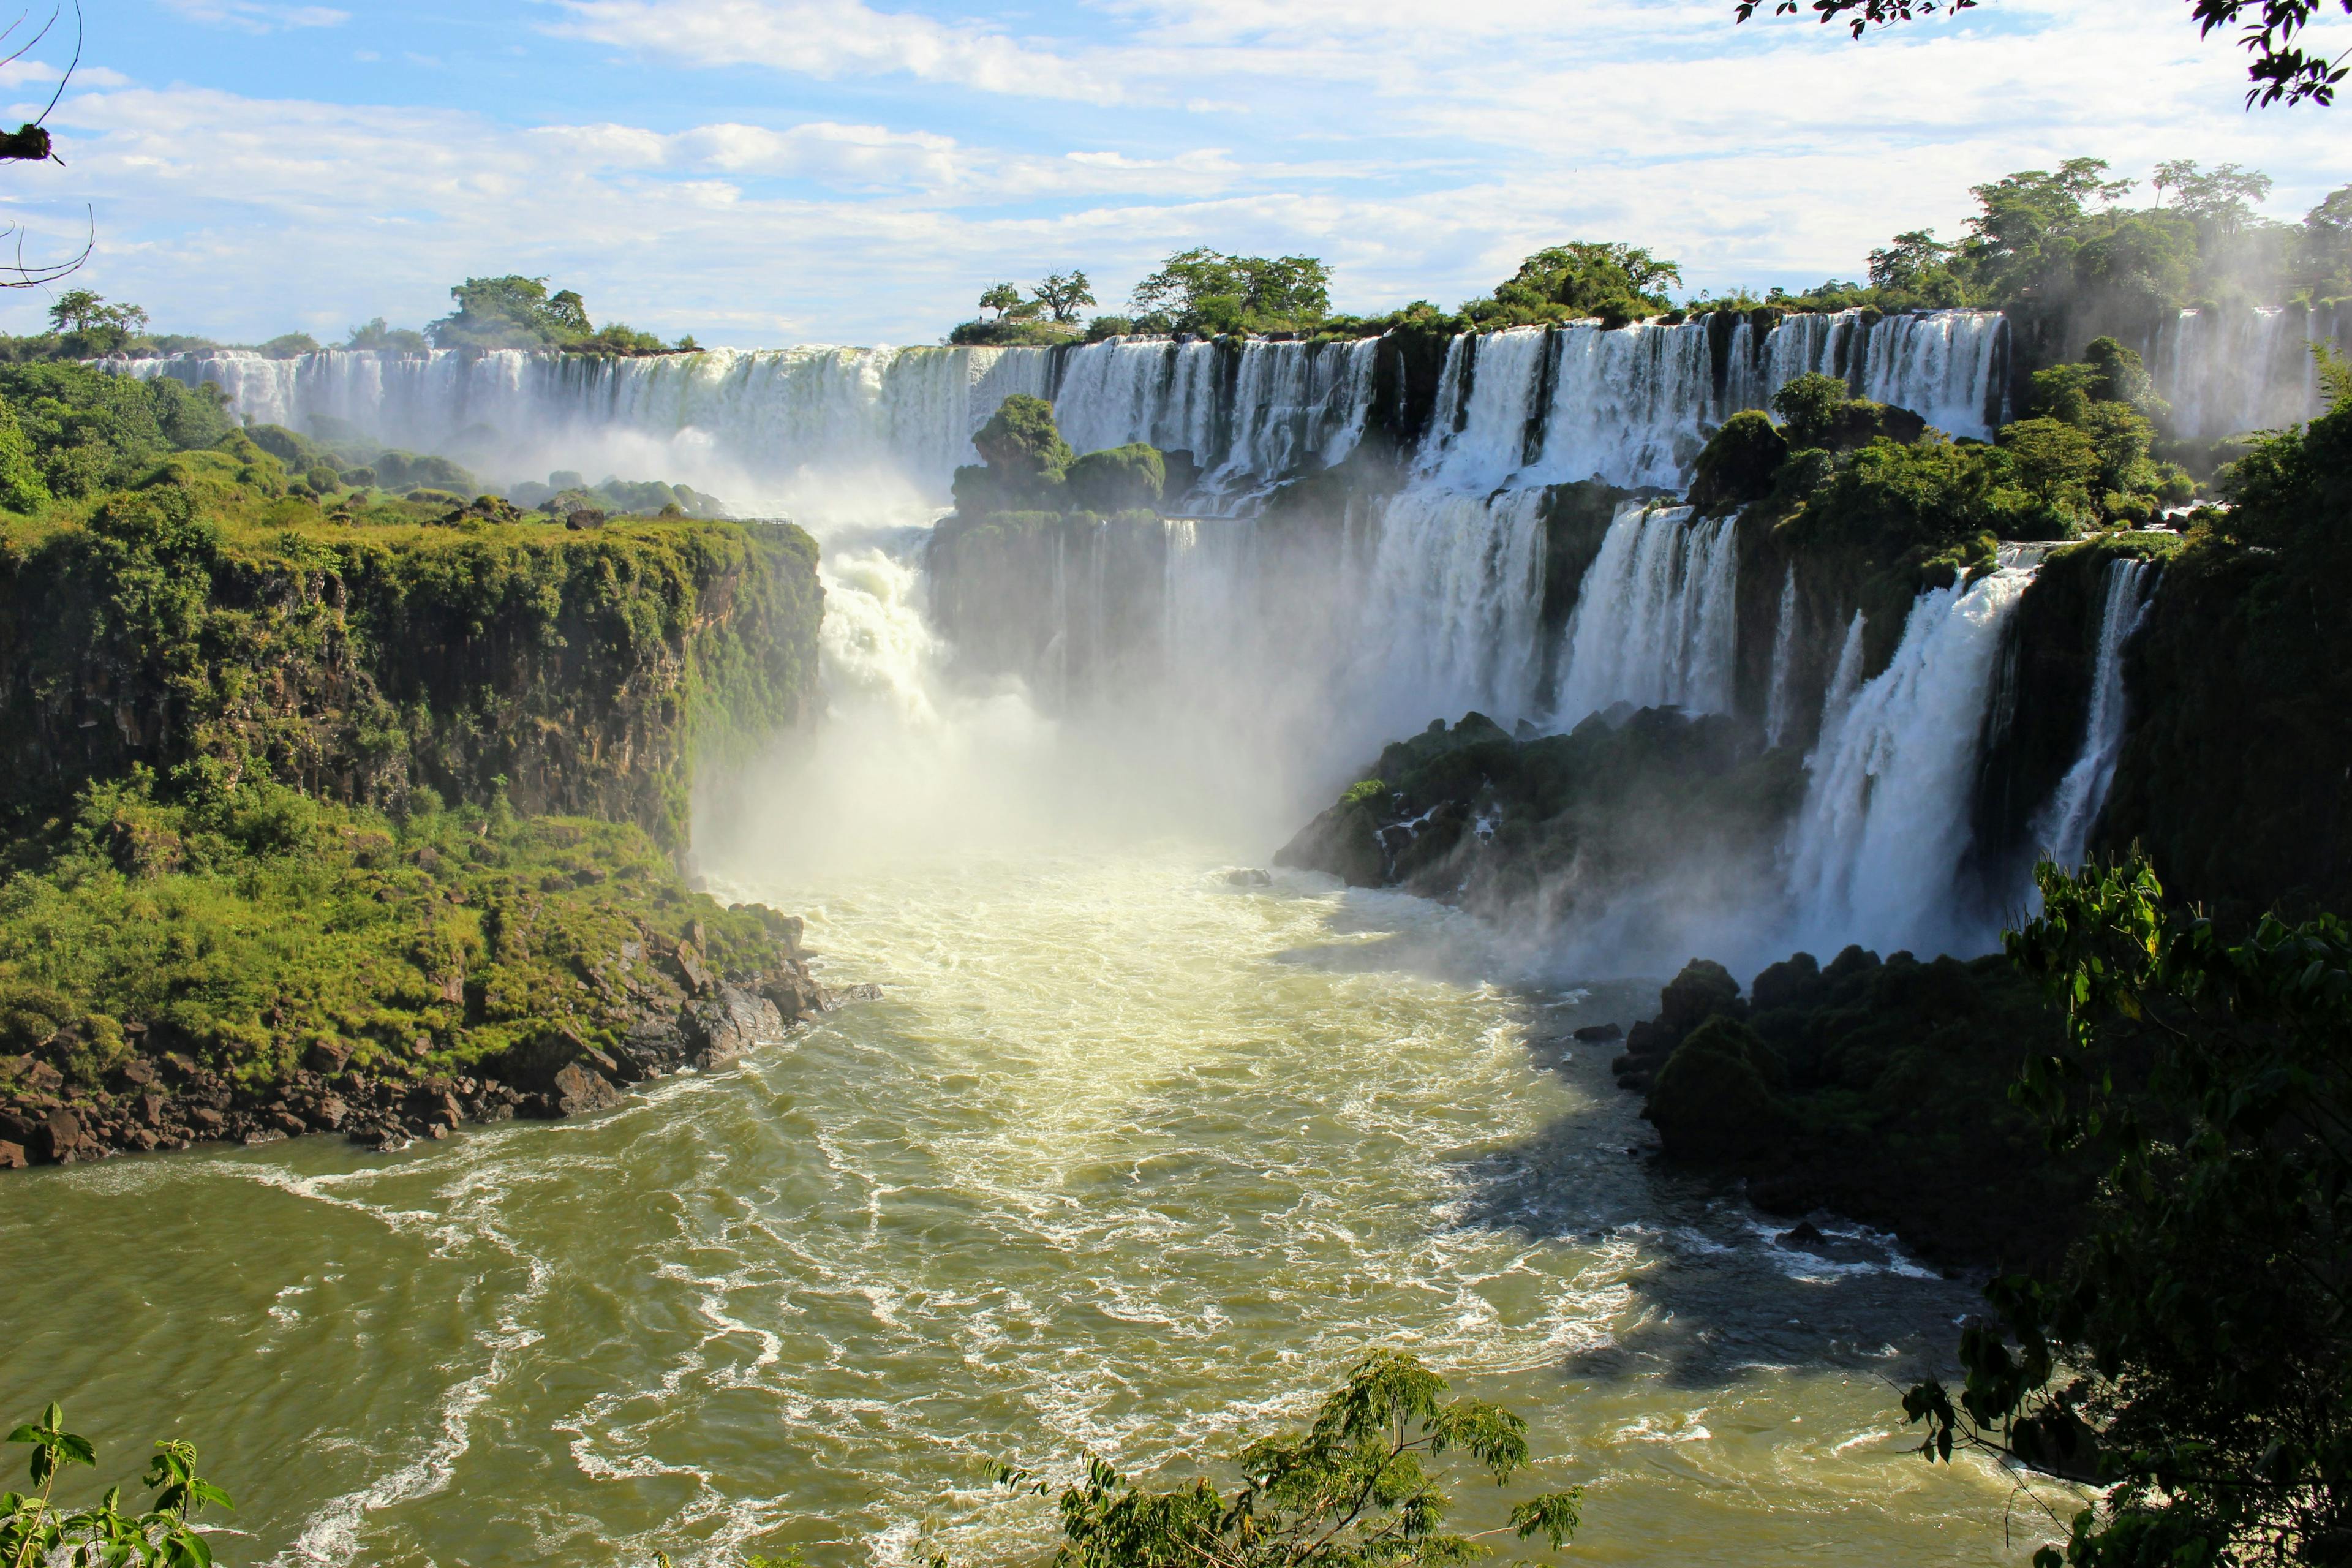 Cover Image for The Very Beautiful Iguazú Falls